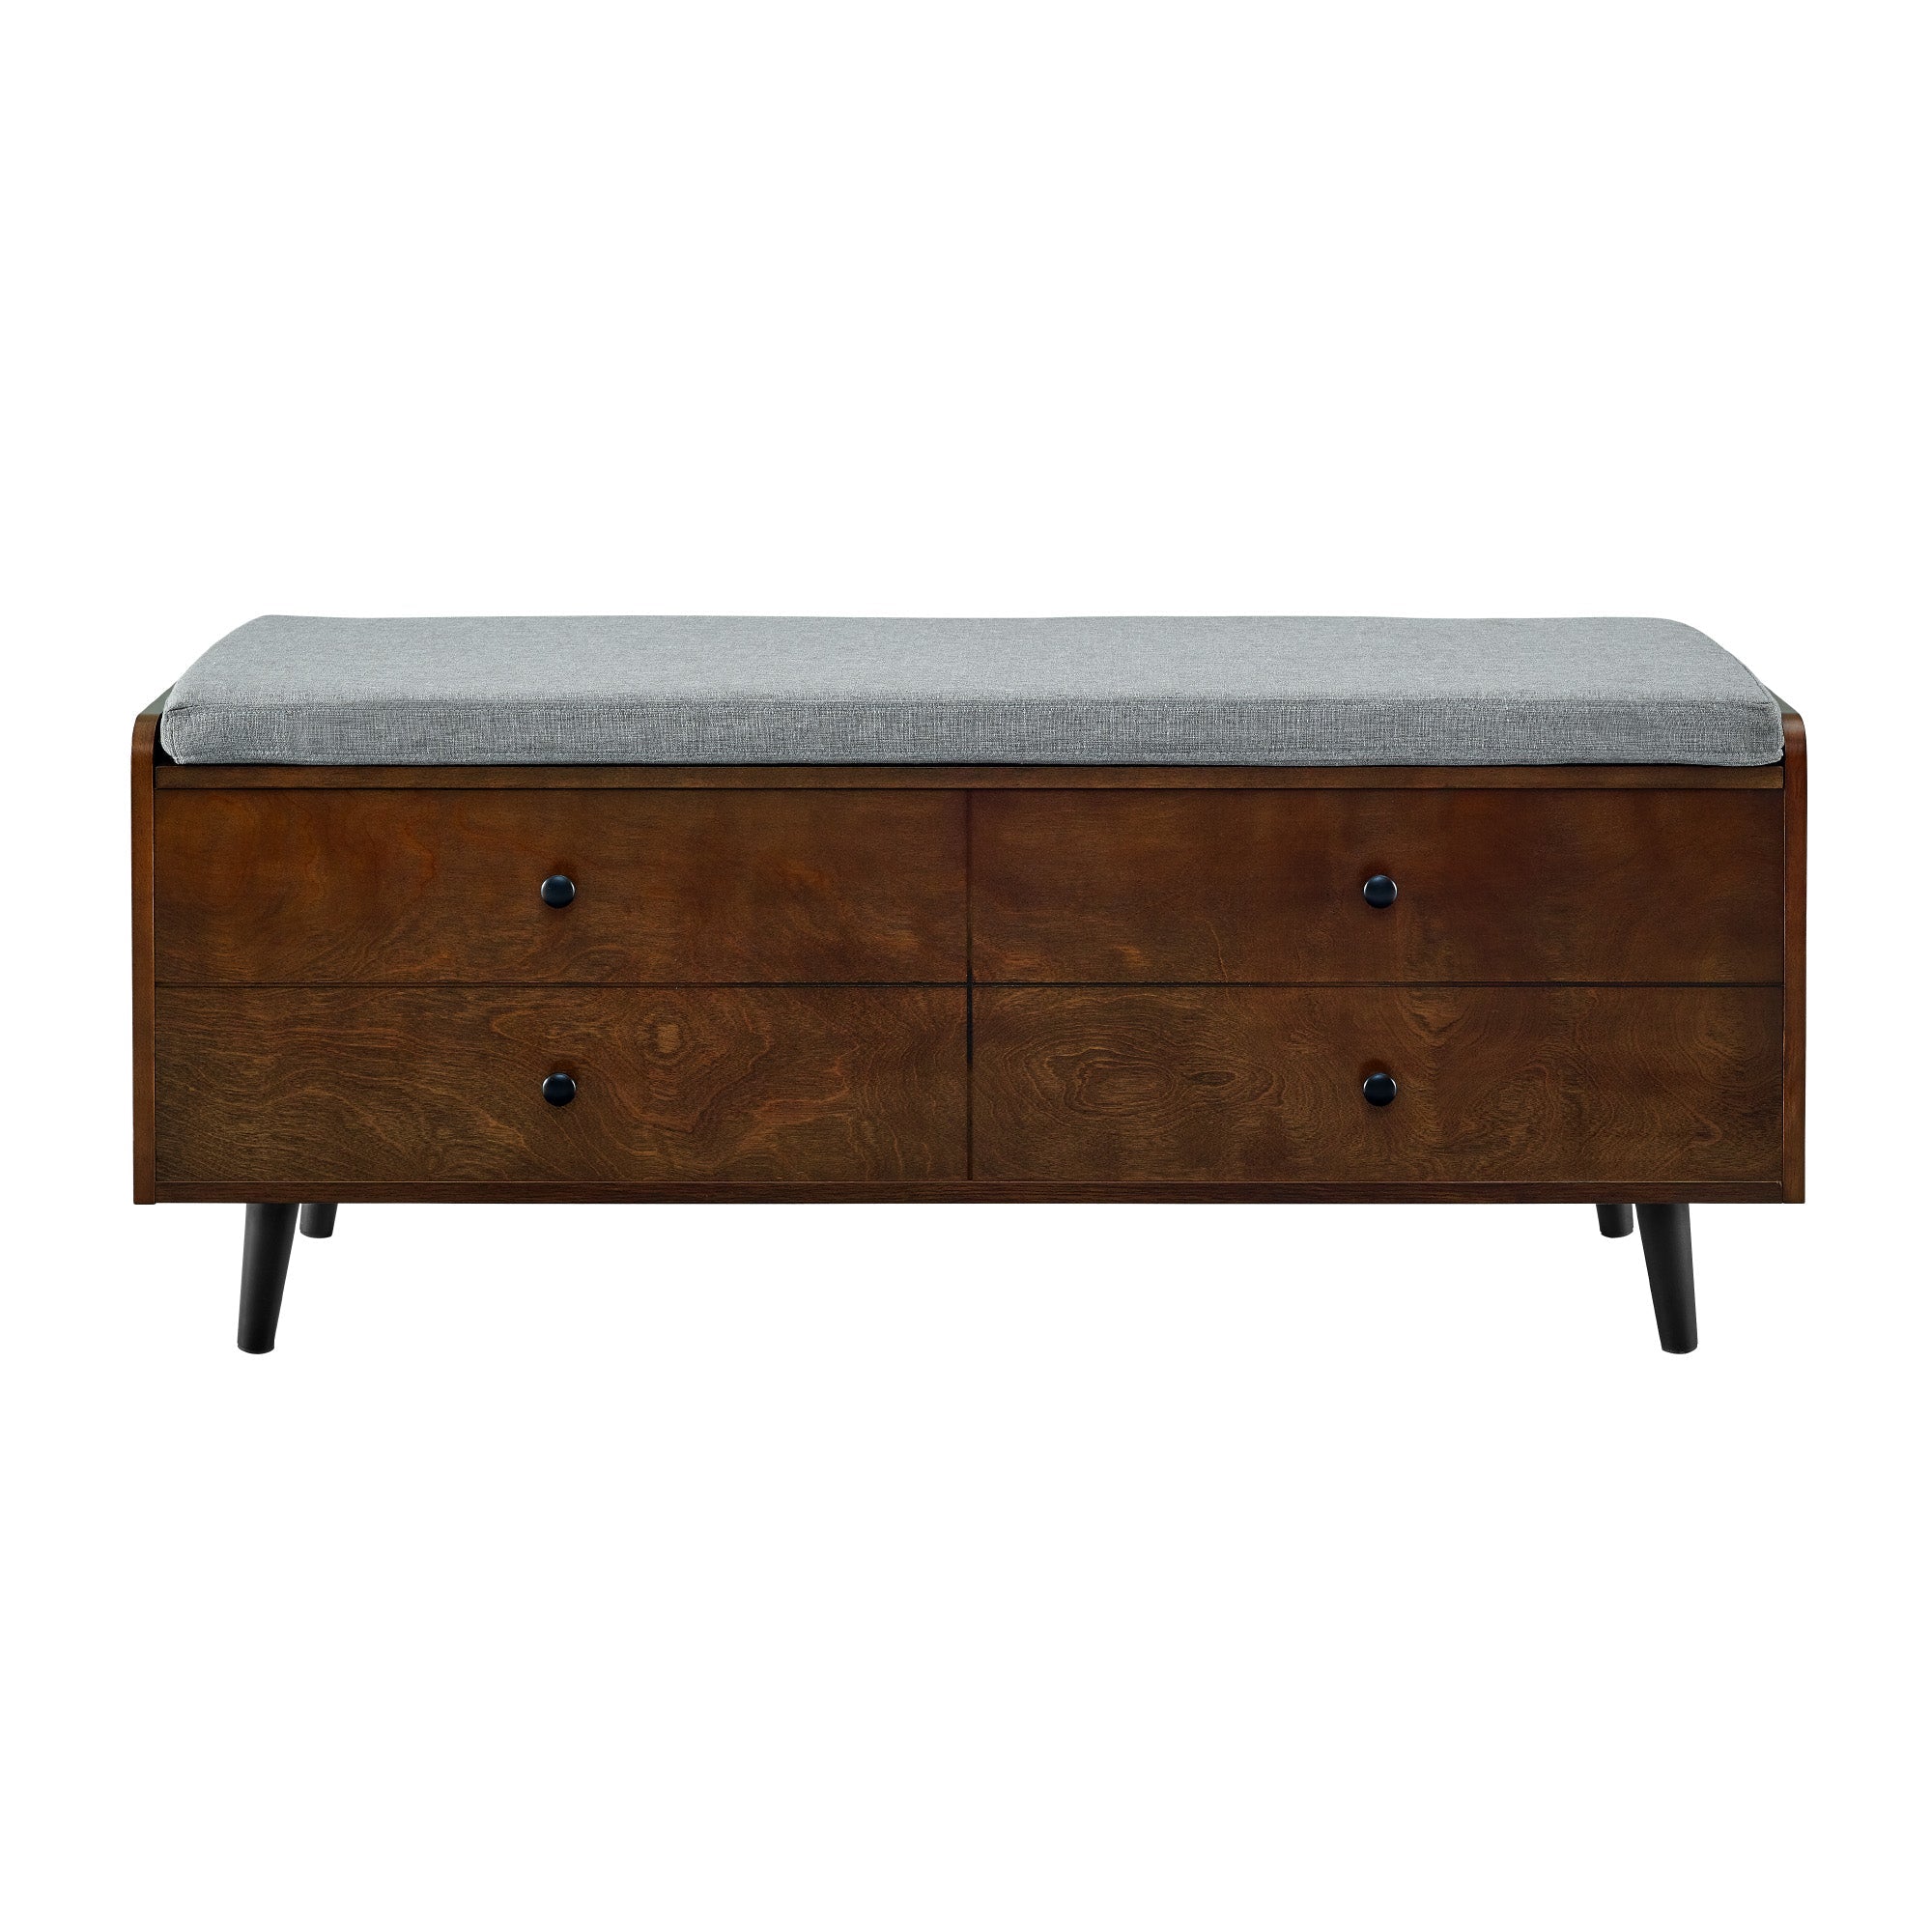 46" Mid Century Storage Bench with Cushion - East Shore Modern Home Furnishings